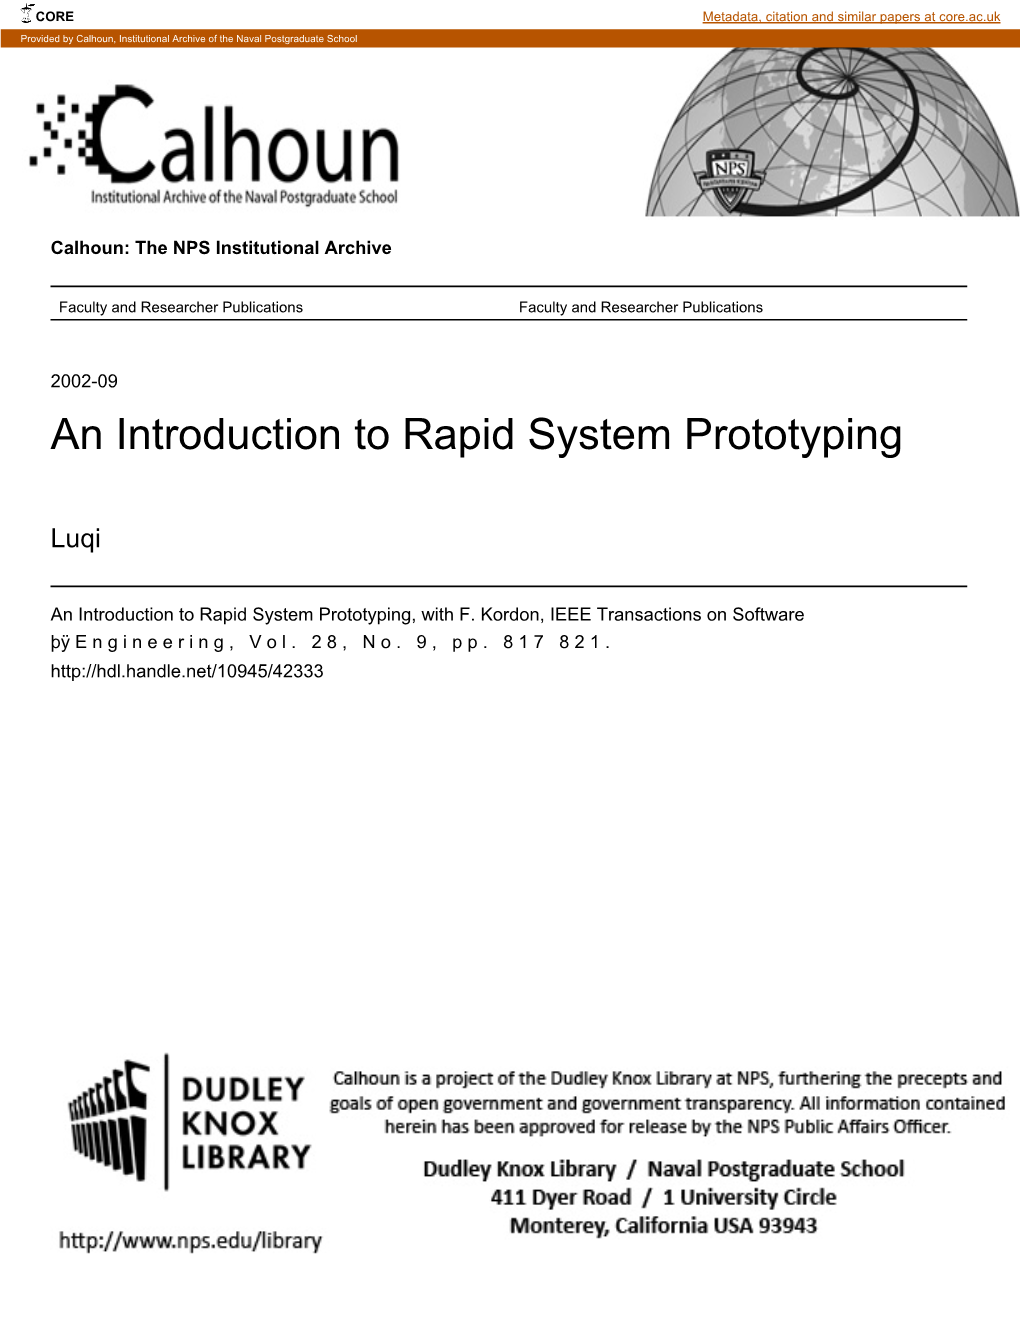 An Introduction to Rapid System Prototyping